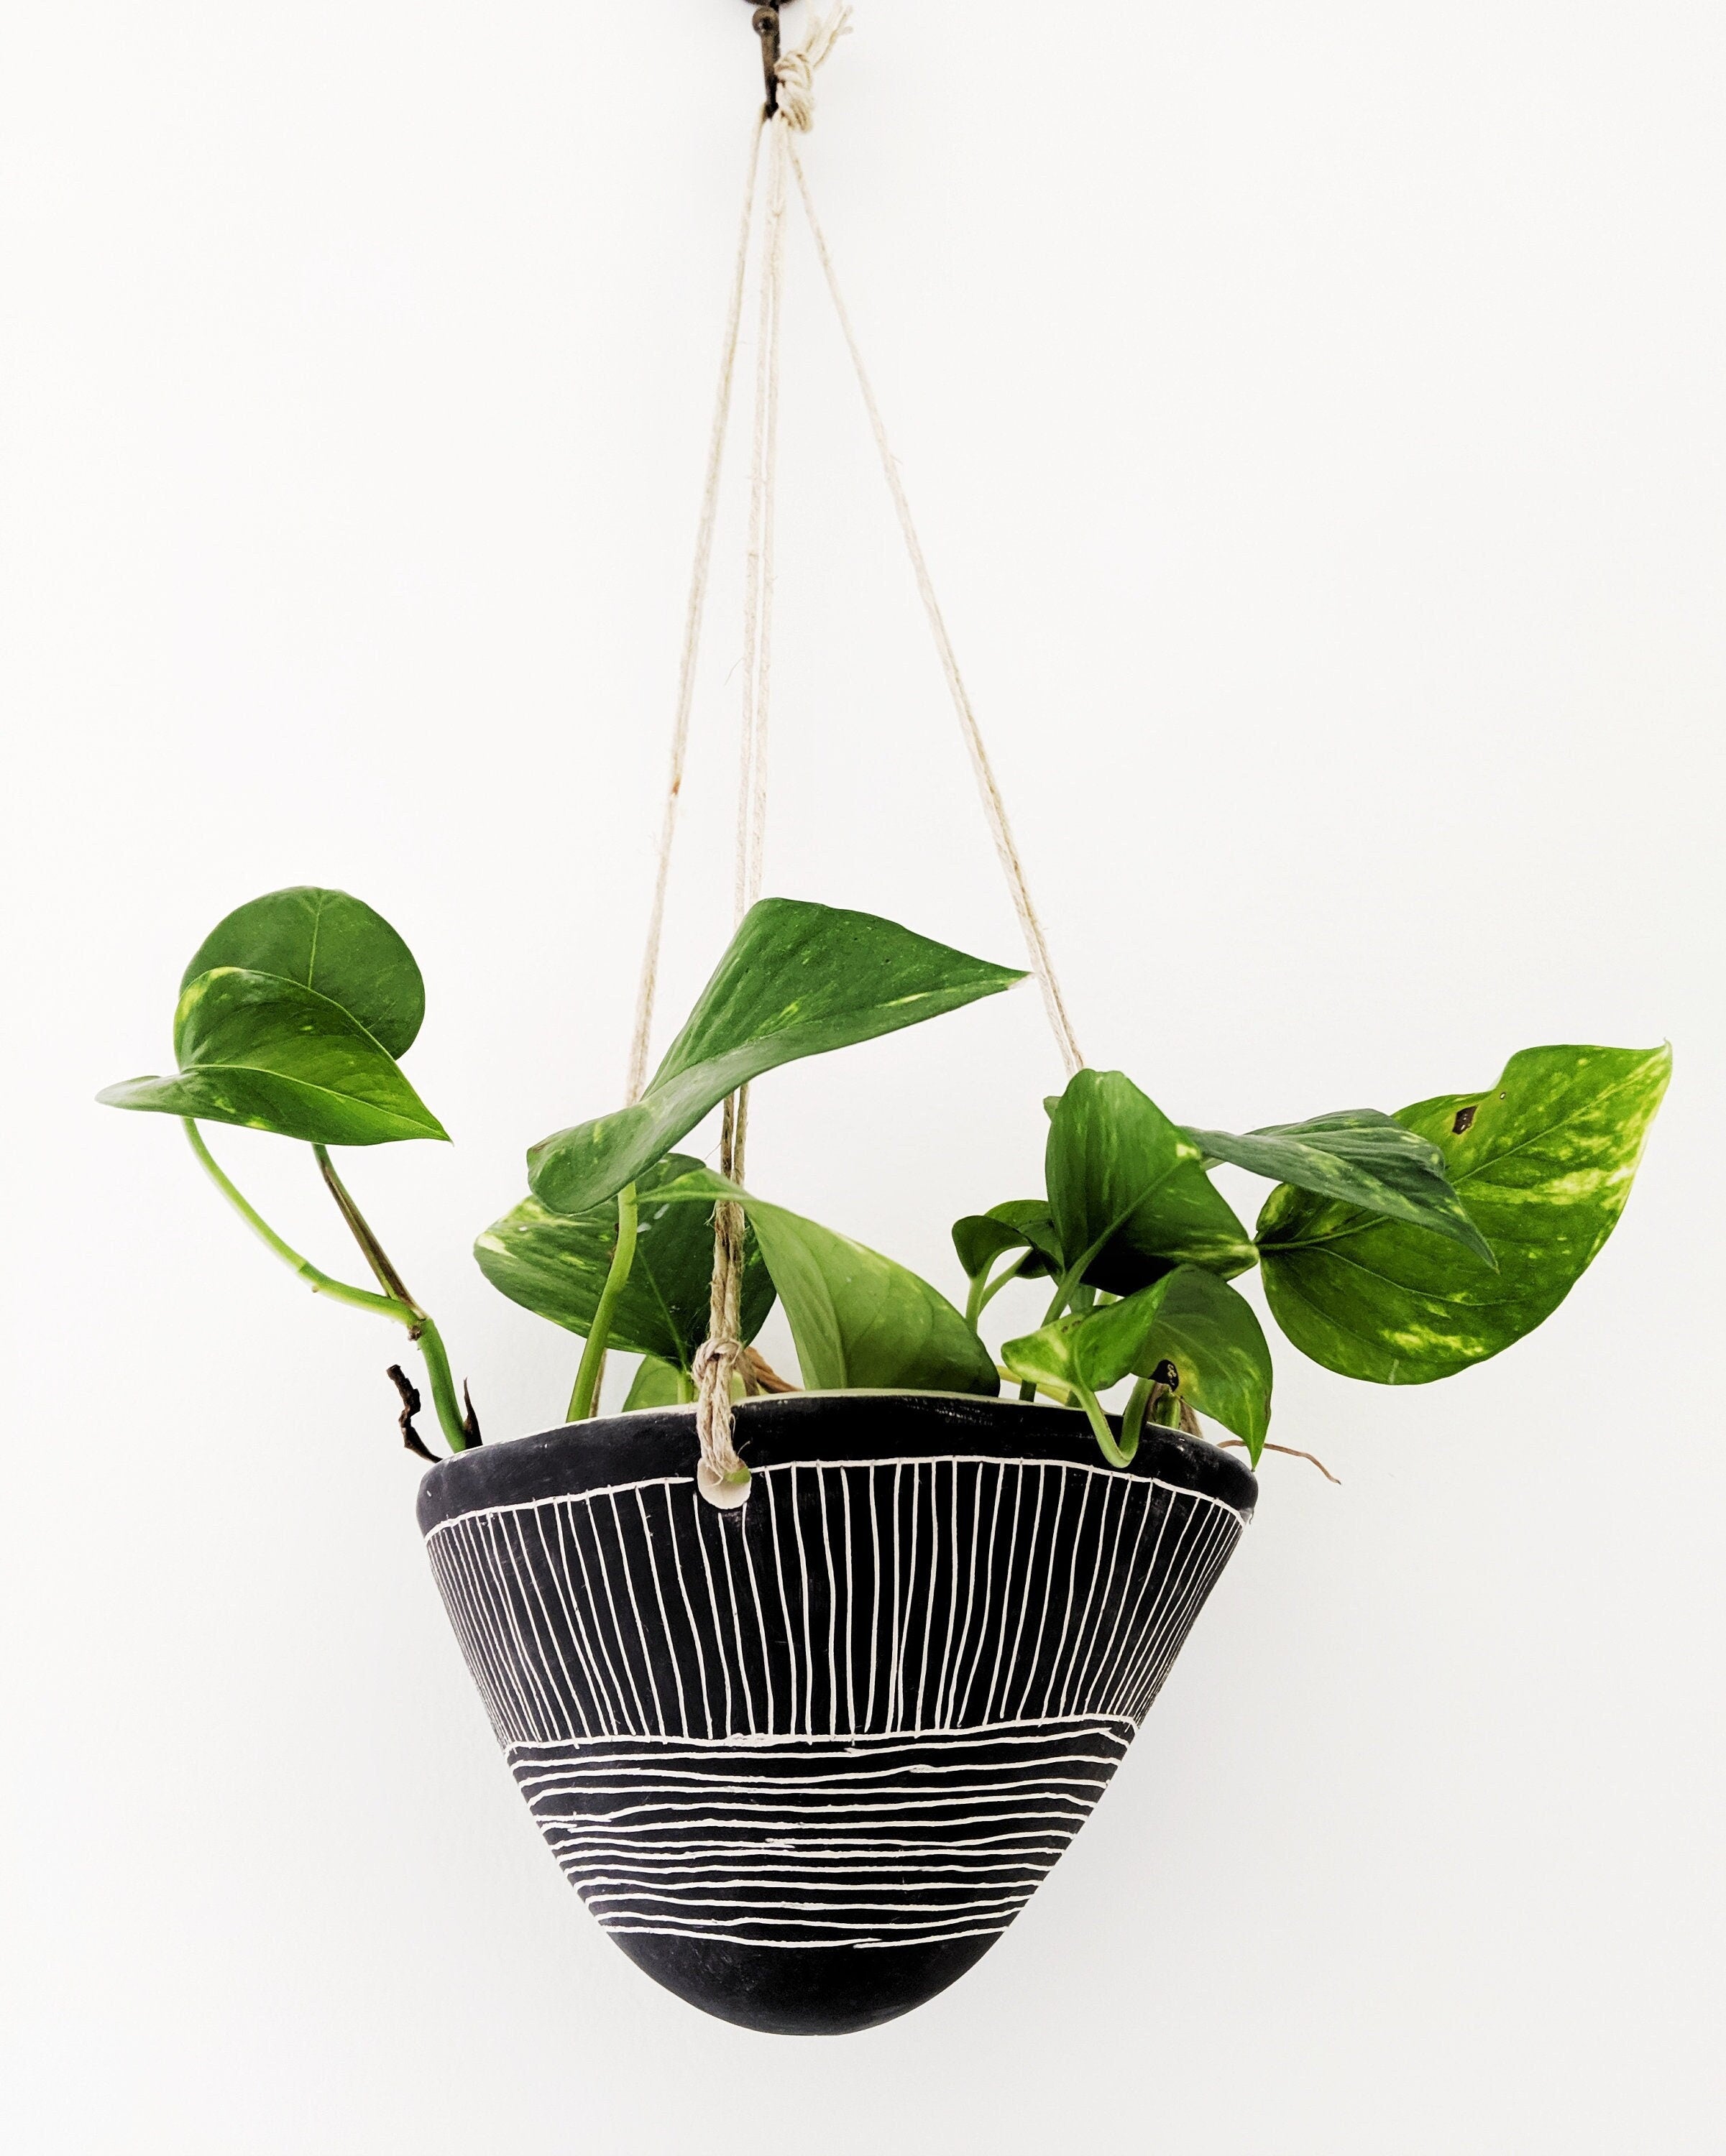 Black & White Hanging Planter w/ "Directional Line" Design - Hanging Pot with Carvings - Succulent, Cactus, Herb, Air Plant - Housewarming